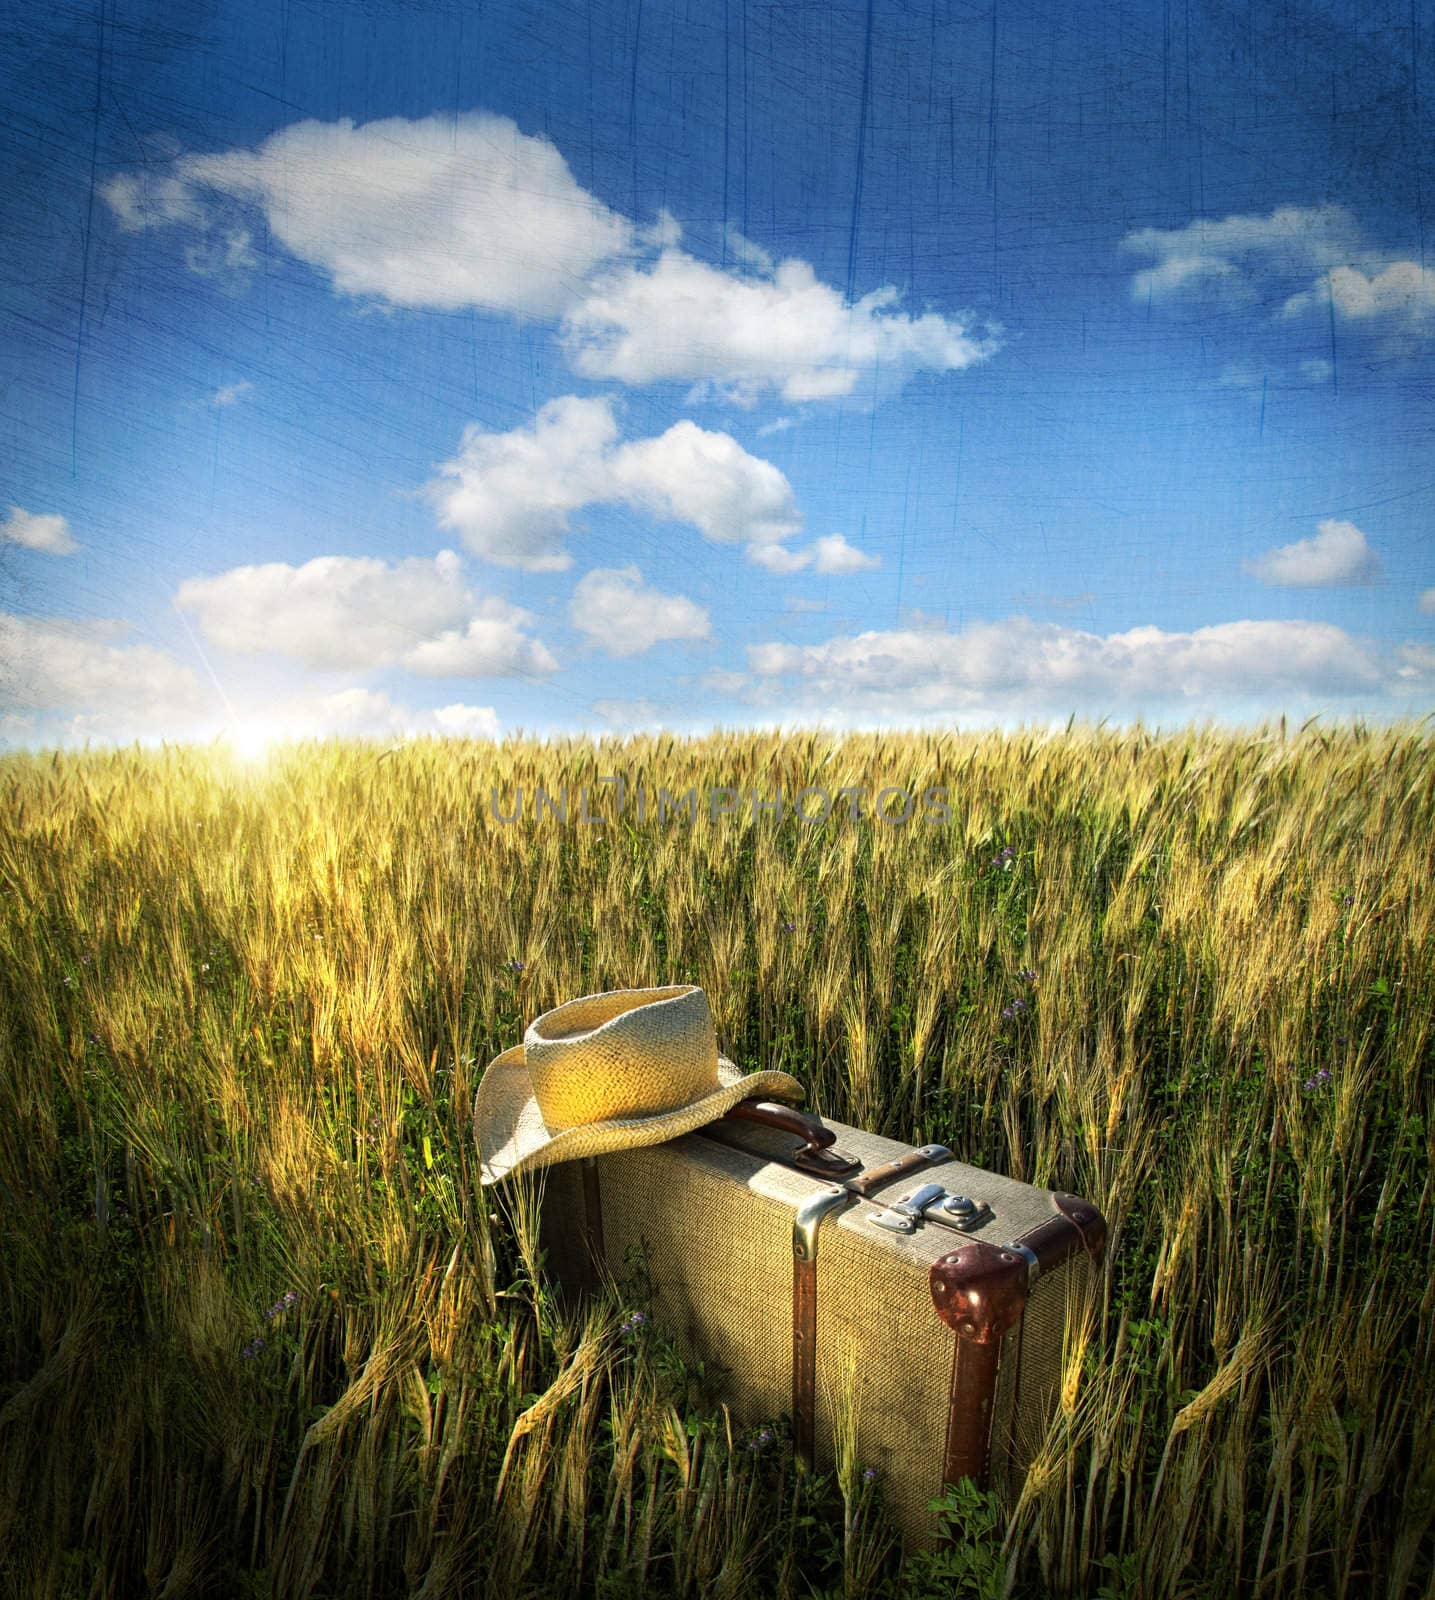 Old suitcase with straw hat in wheatfield